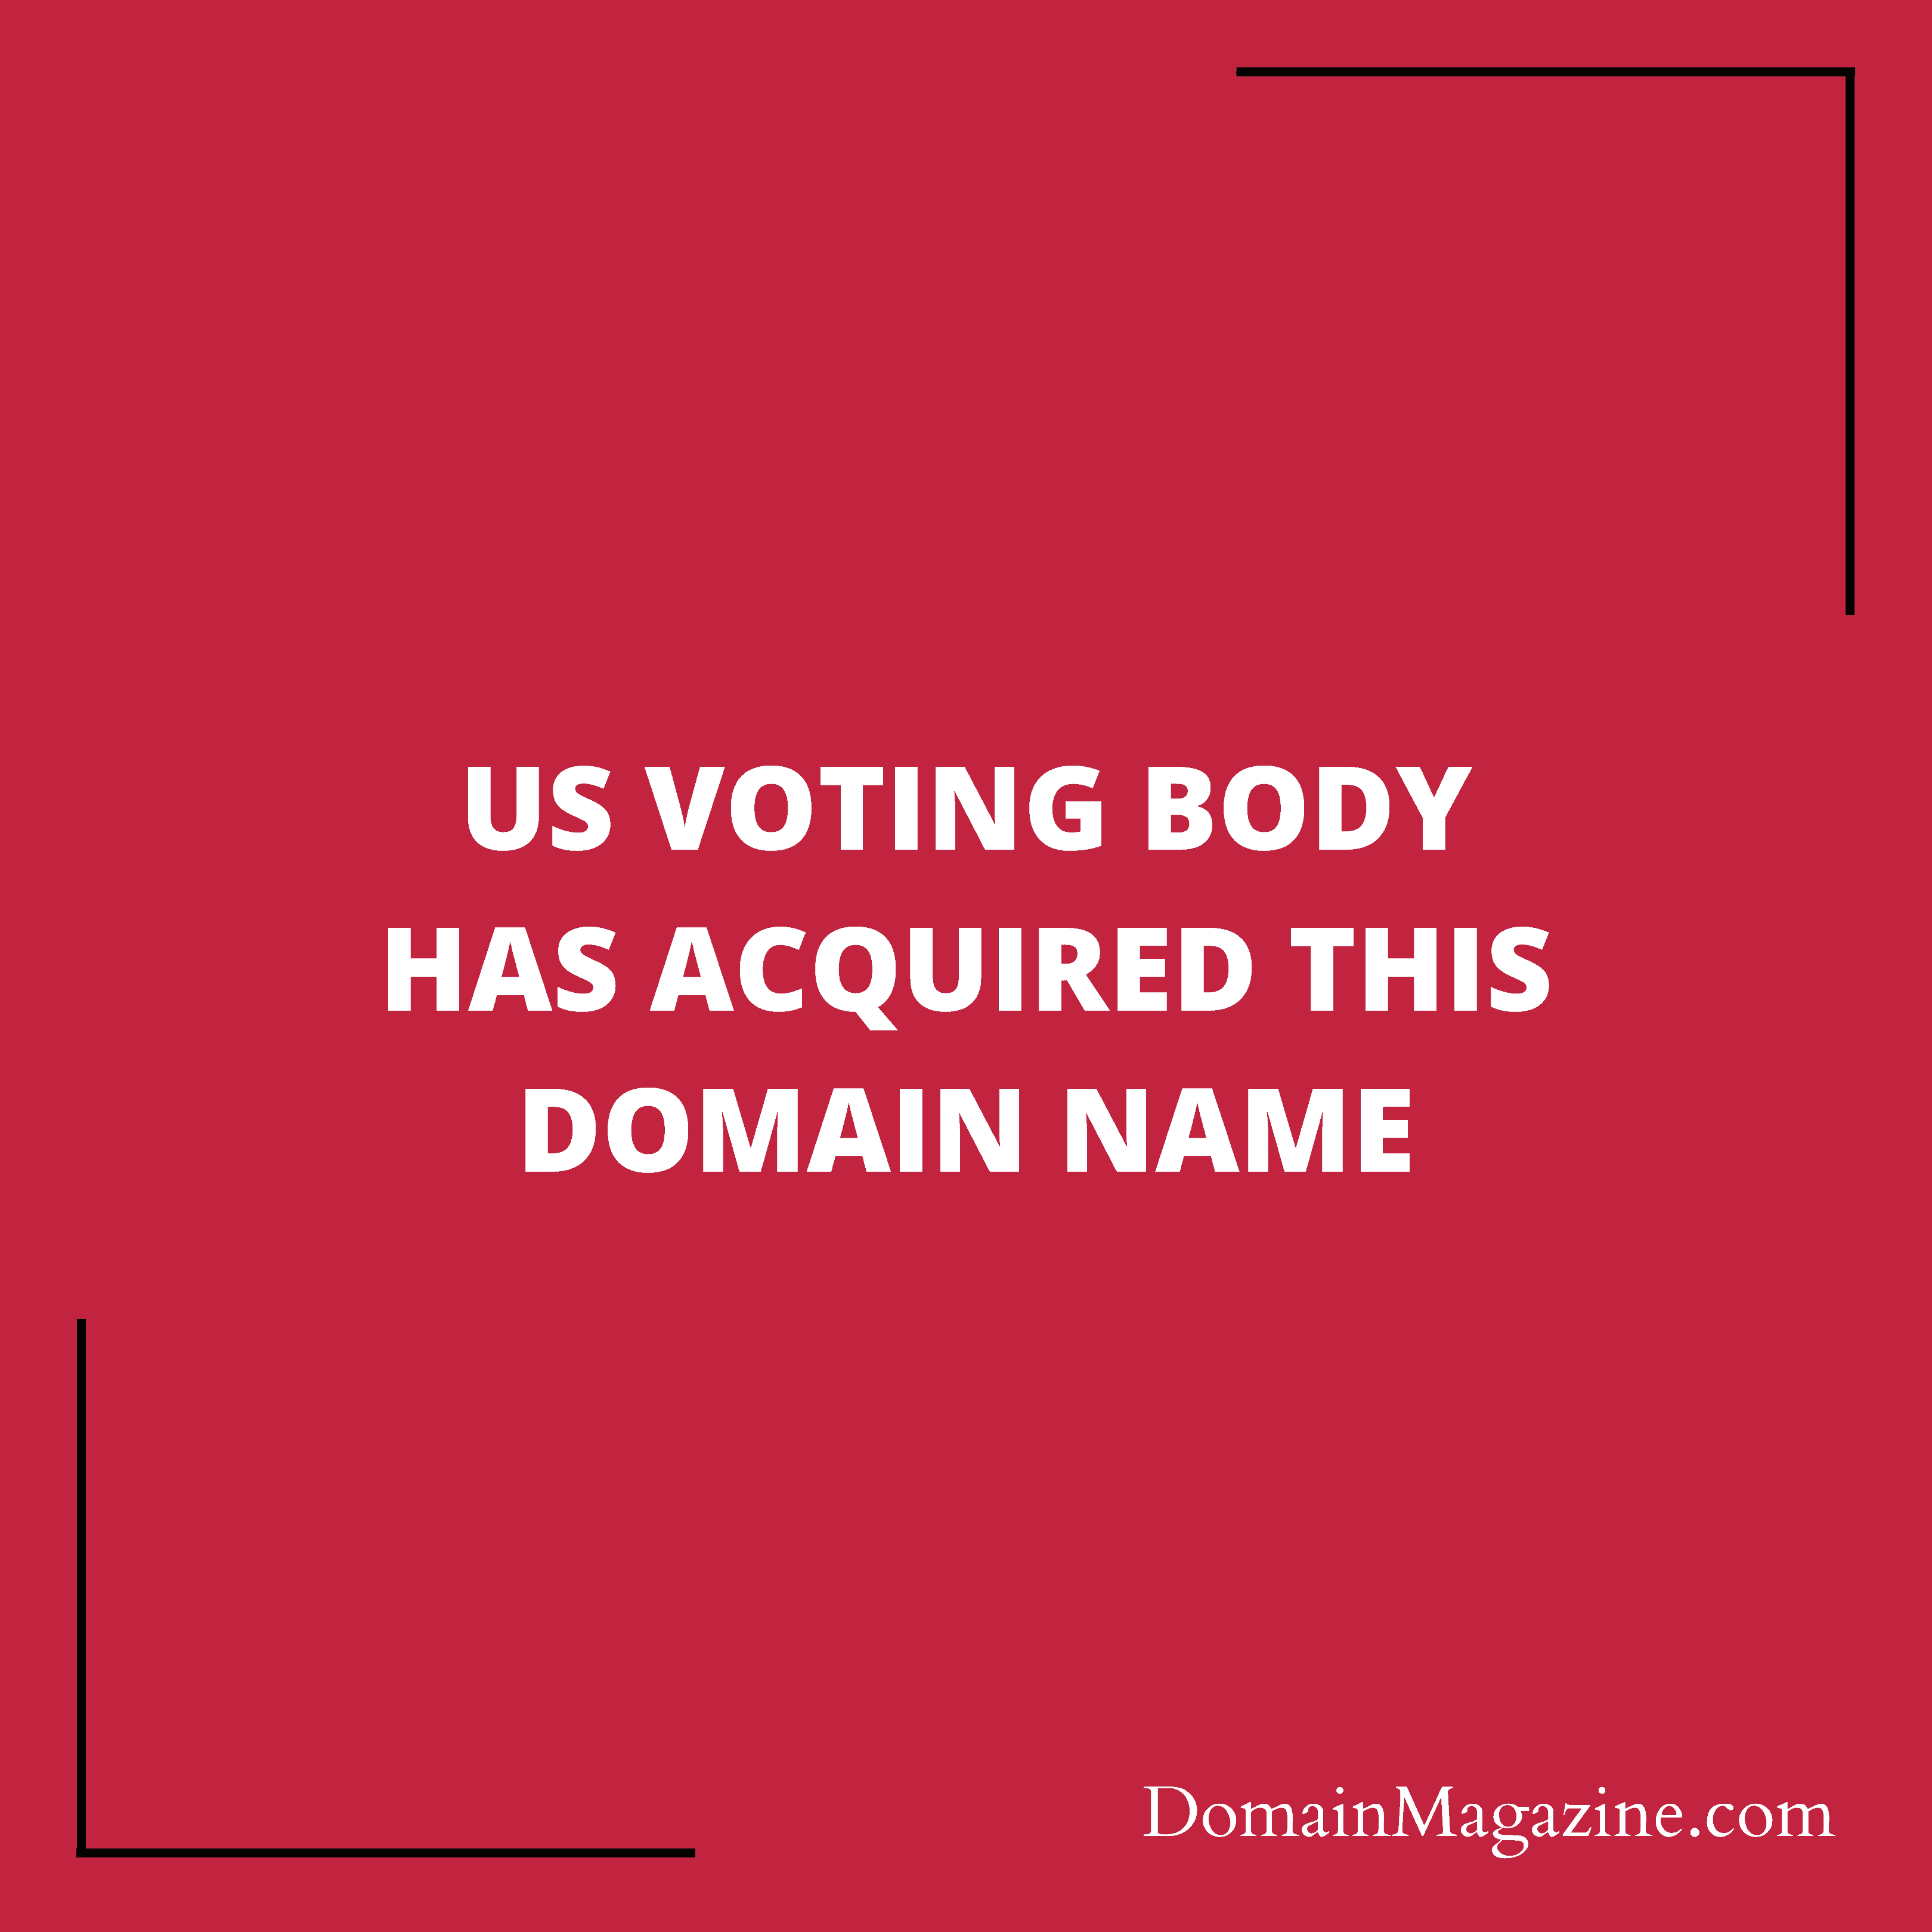 US Voting body has acquired this domain name